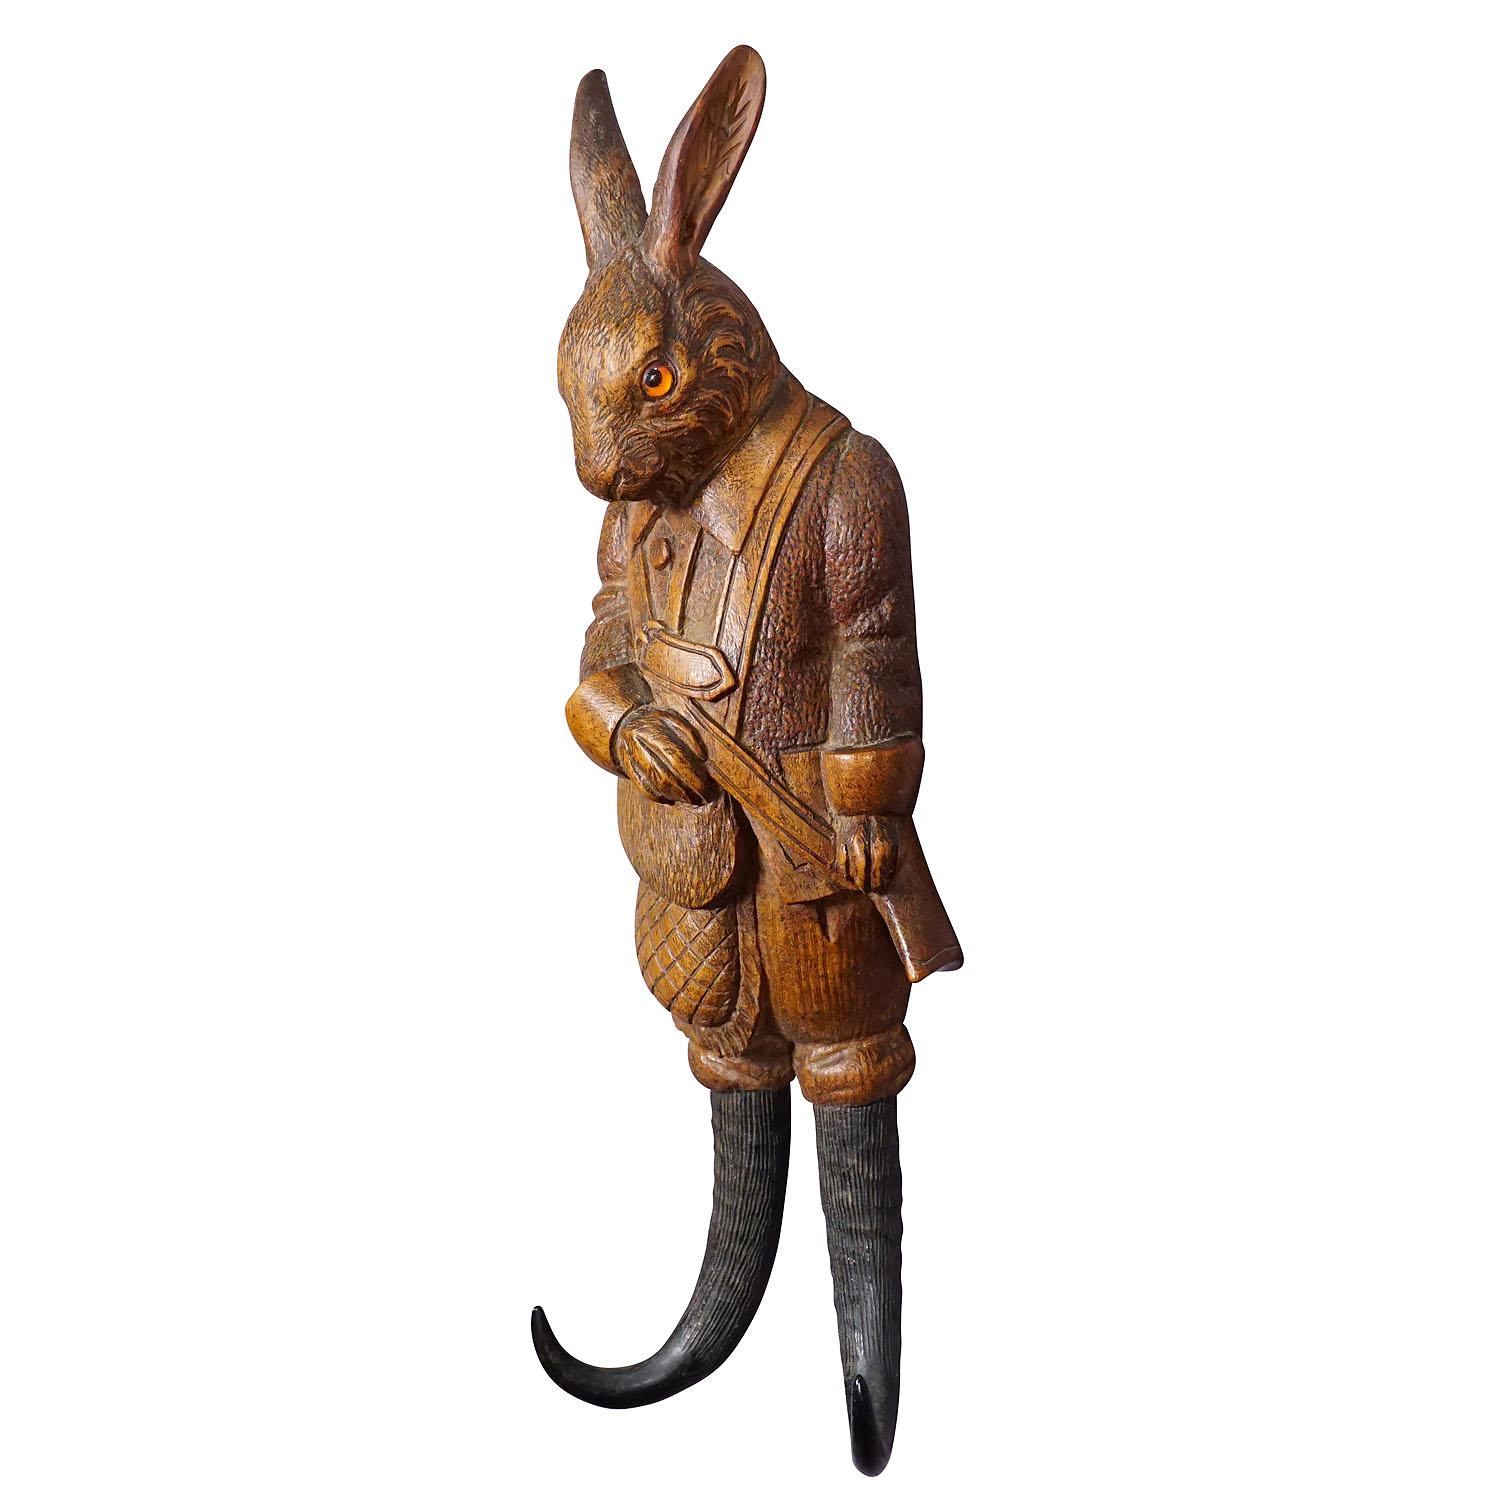 Black Forest Carved Hare Whip Holder or Wall Hook ca. 1900s

A handcarved cabin decor style coat hook or whip holder showing a hare with a gun. The hooks are made from genuine chamois horns. Handcarved in Brienz, Switzerland around 1900.

The